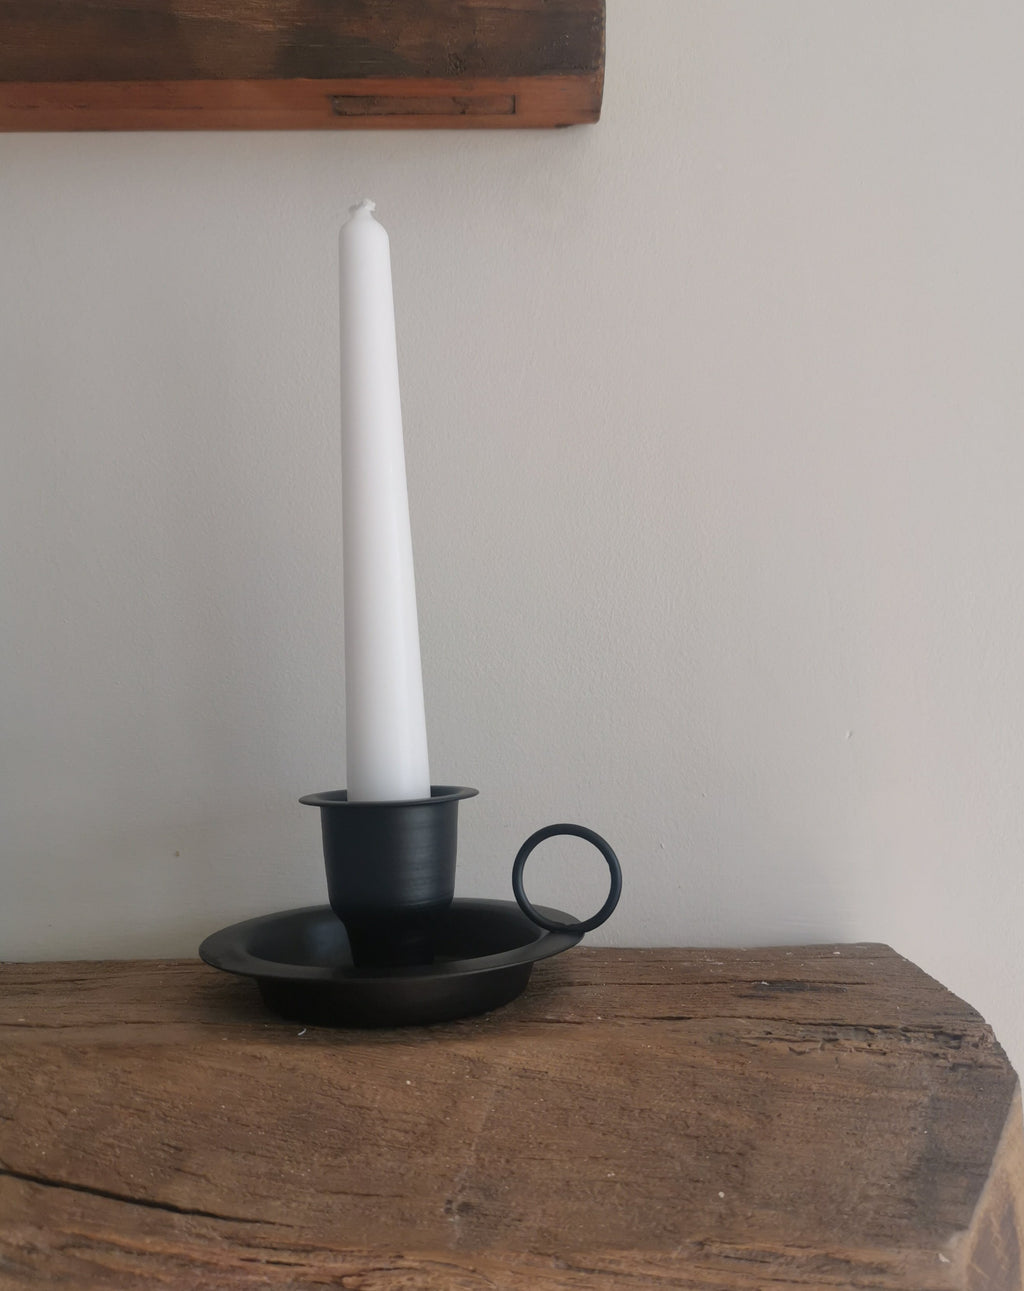 Wrought Iron Candle Holder - The Burrow Interiors